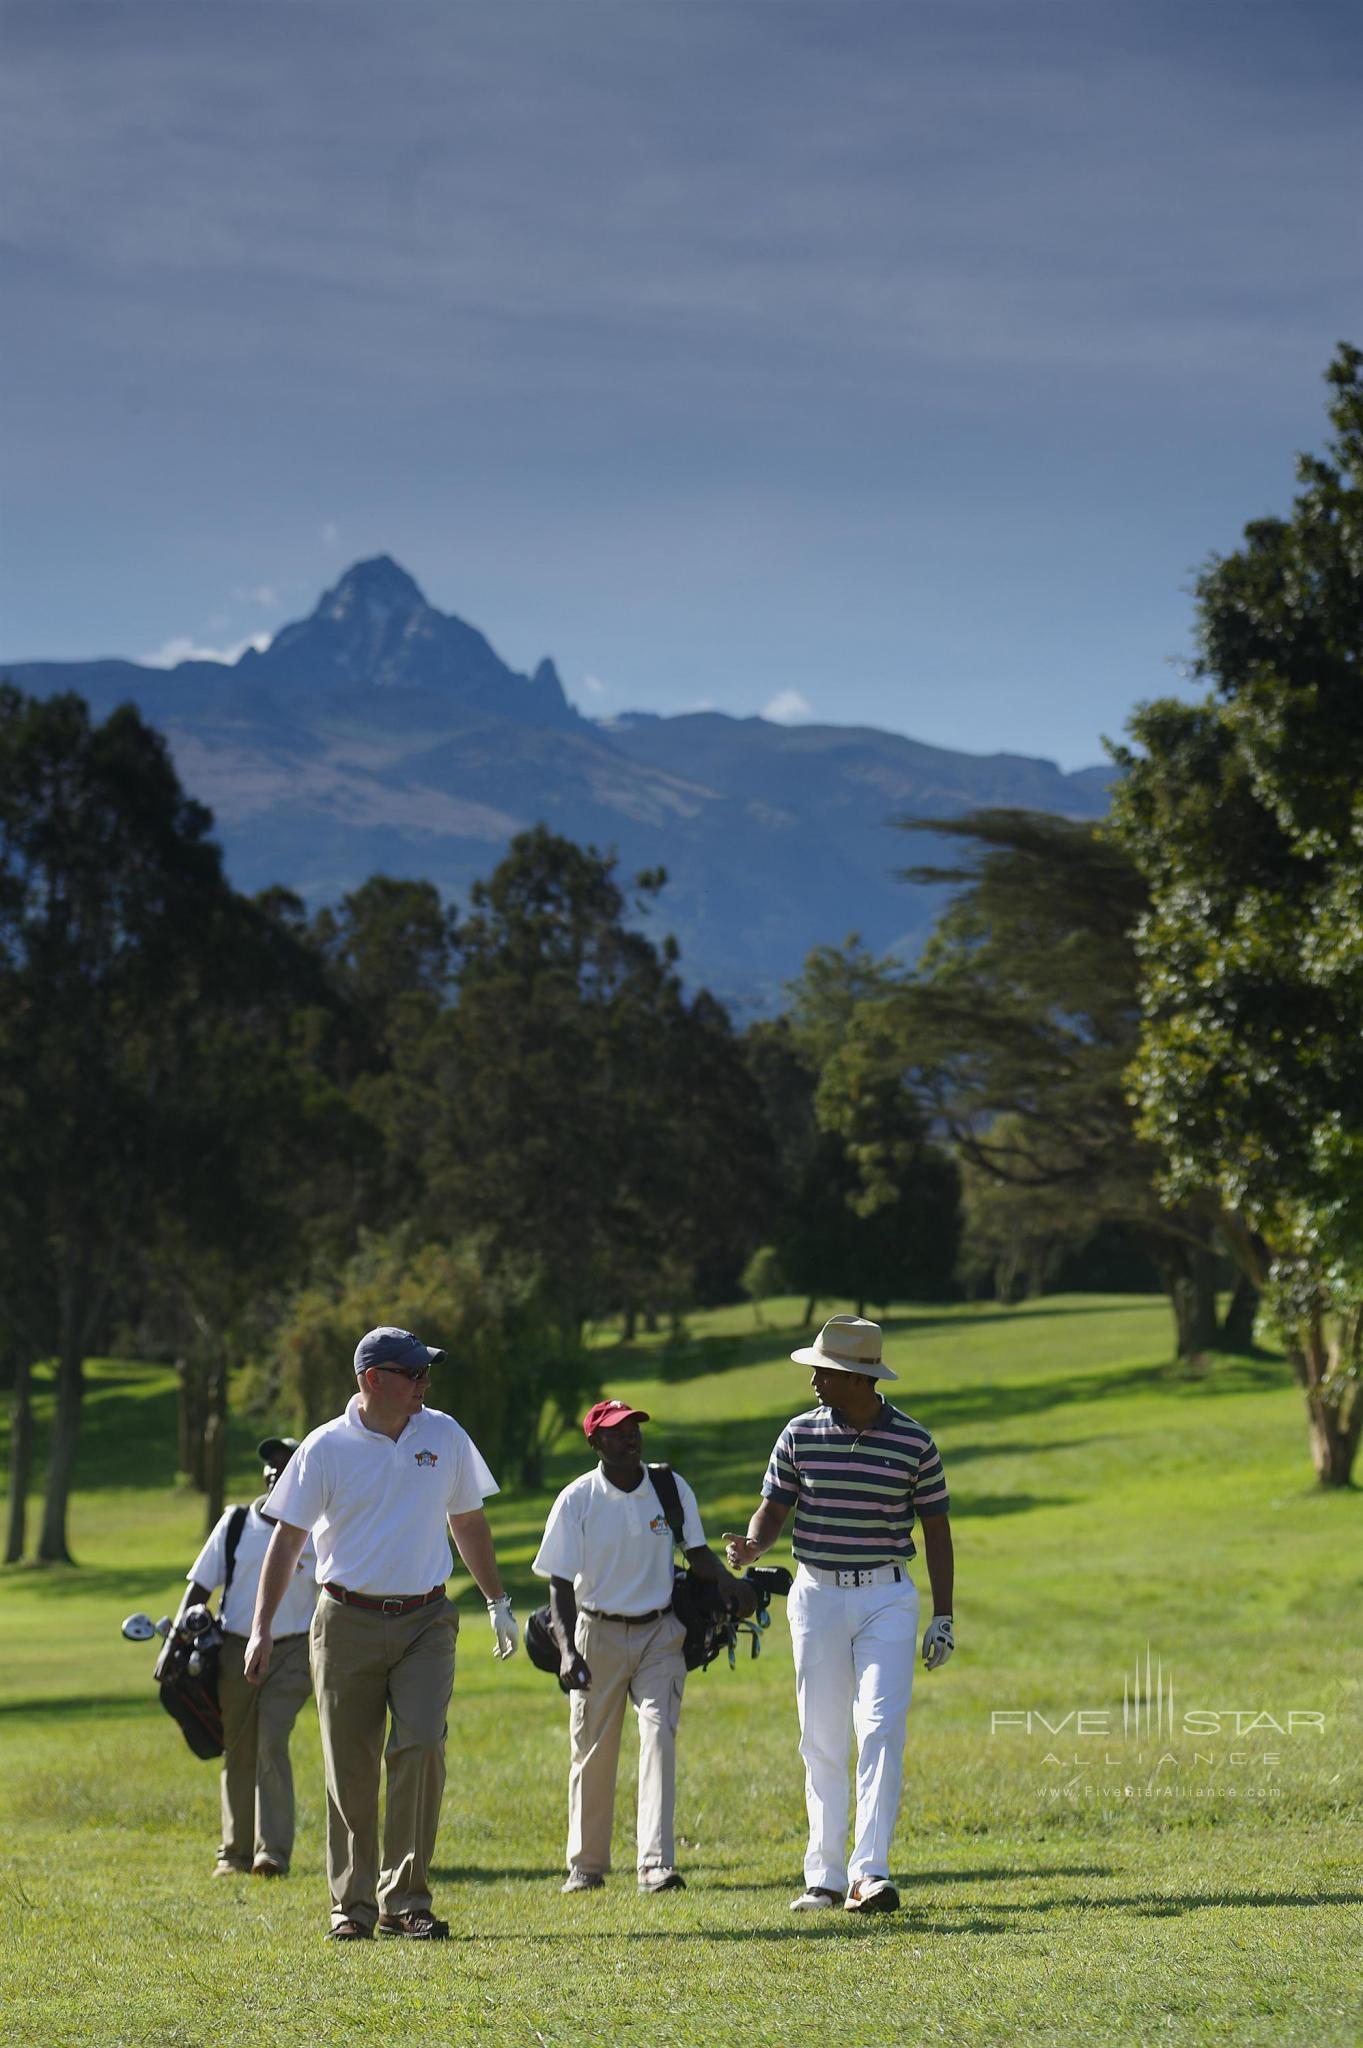 Golfing with a view of Mt. Kenya